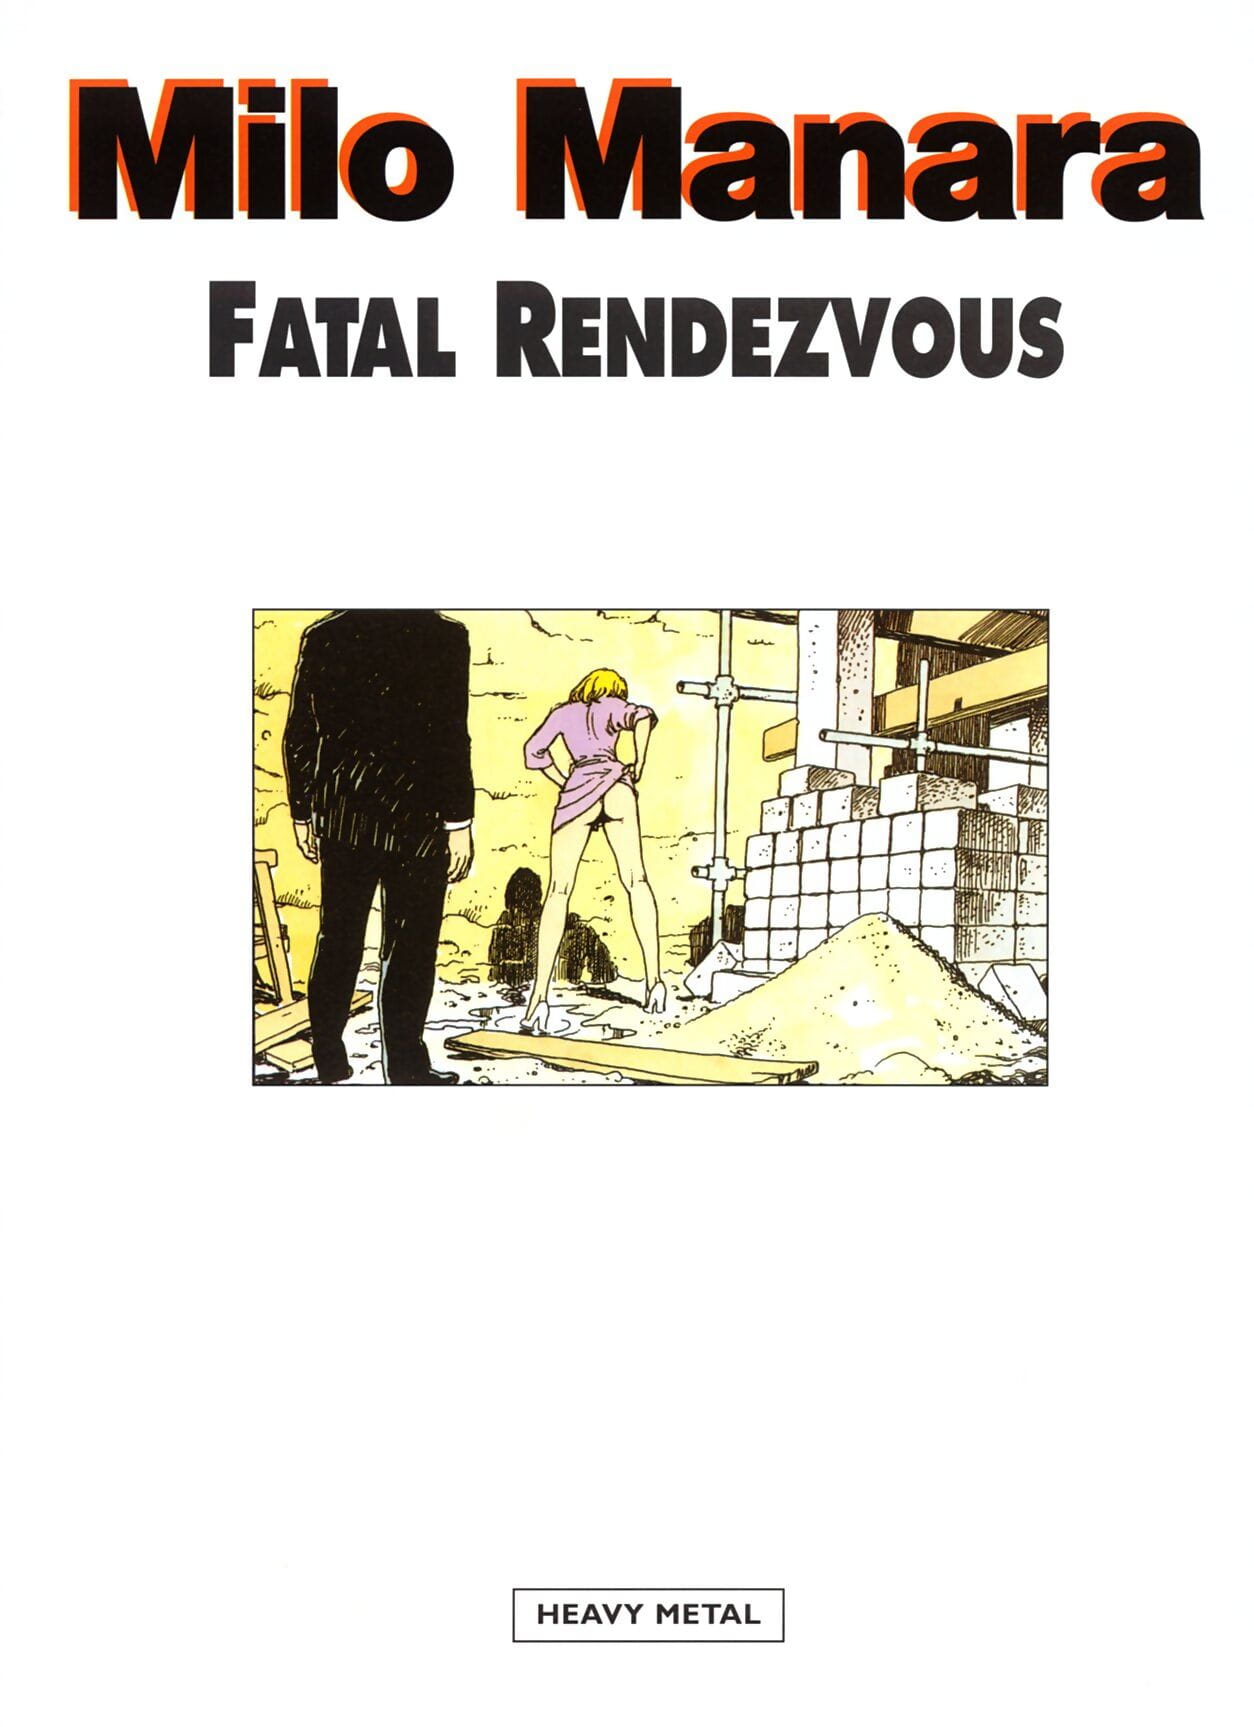 Fatal Rendezvous page 1